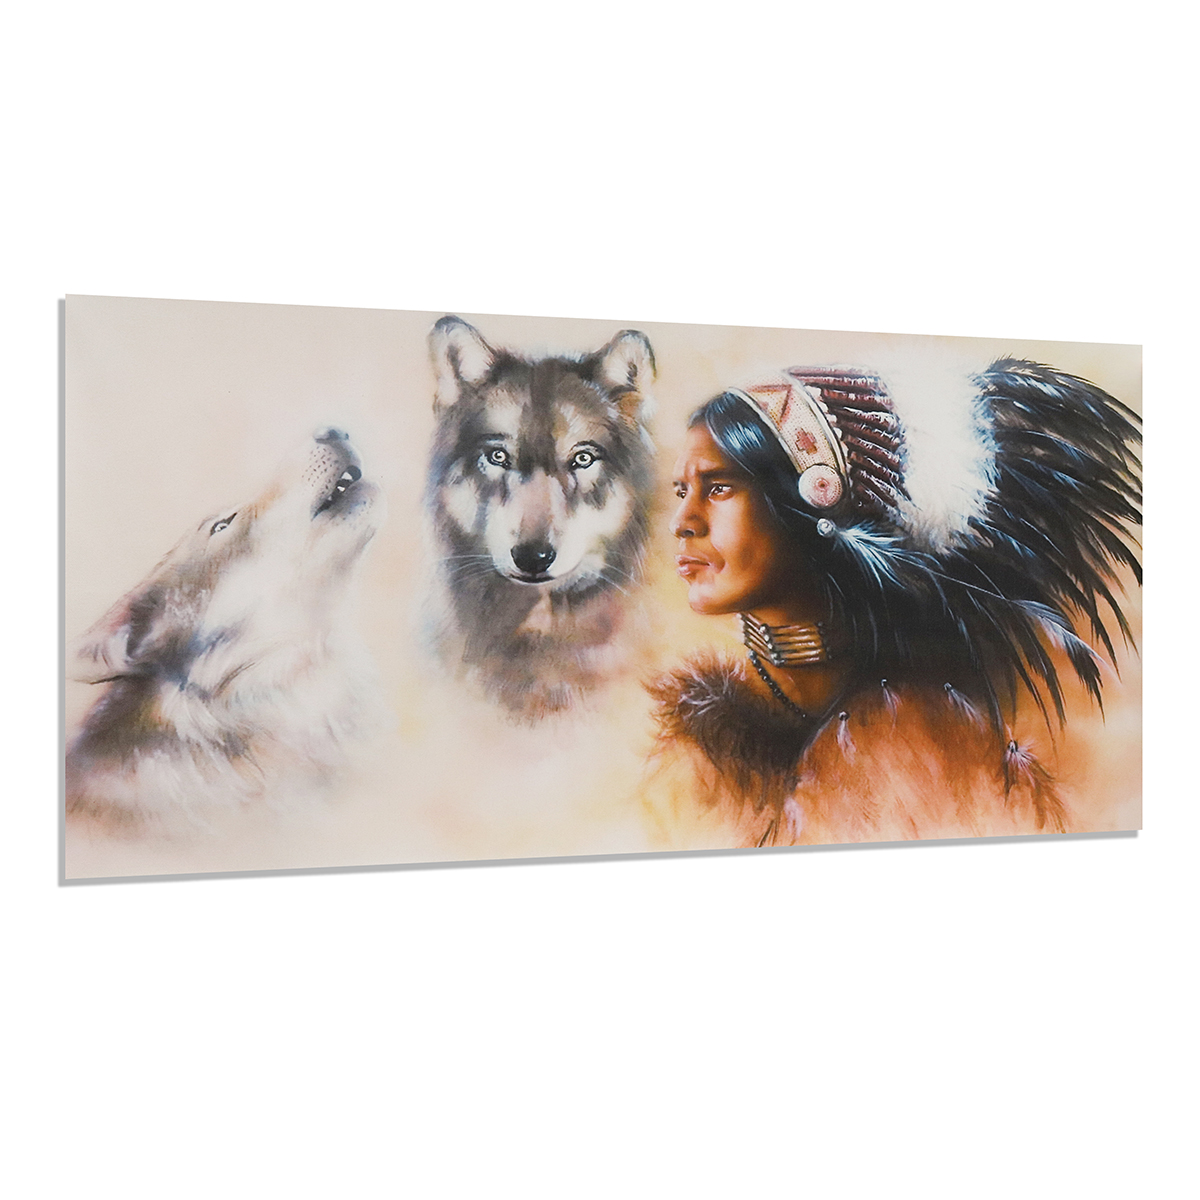 1 Piece Canvas Print Painting Indian Man Wolf Wall Decorative Art Picture Frameless Wall Hanging Home Office Decoration